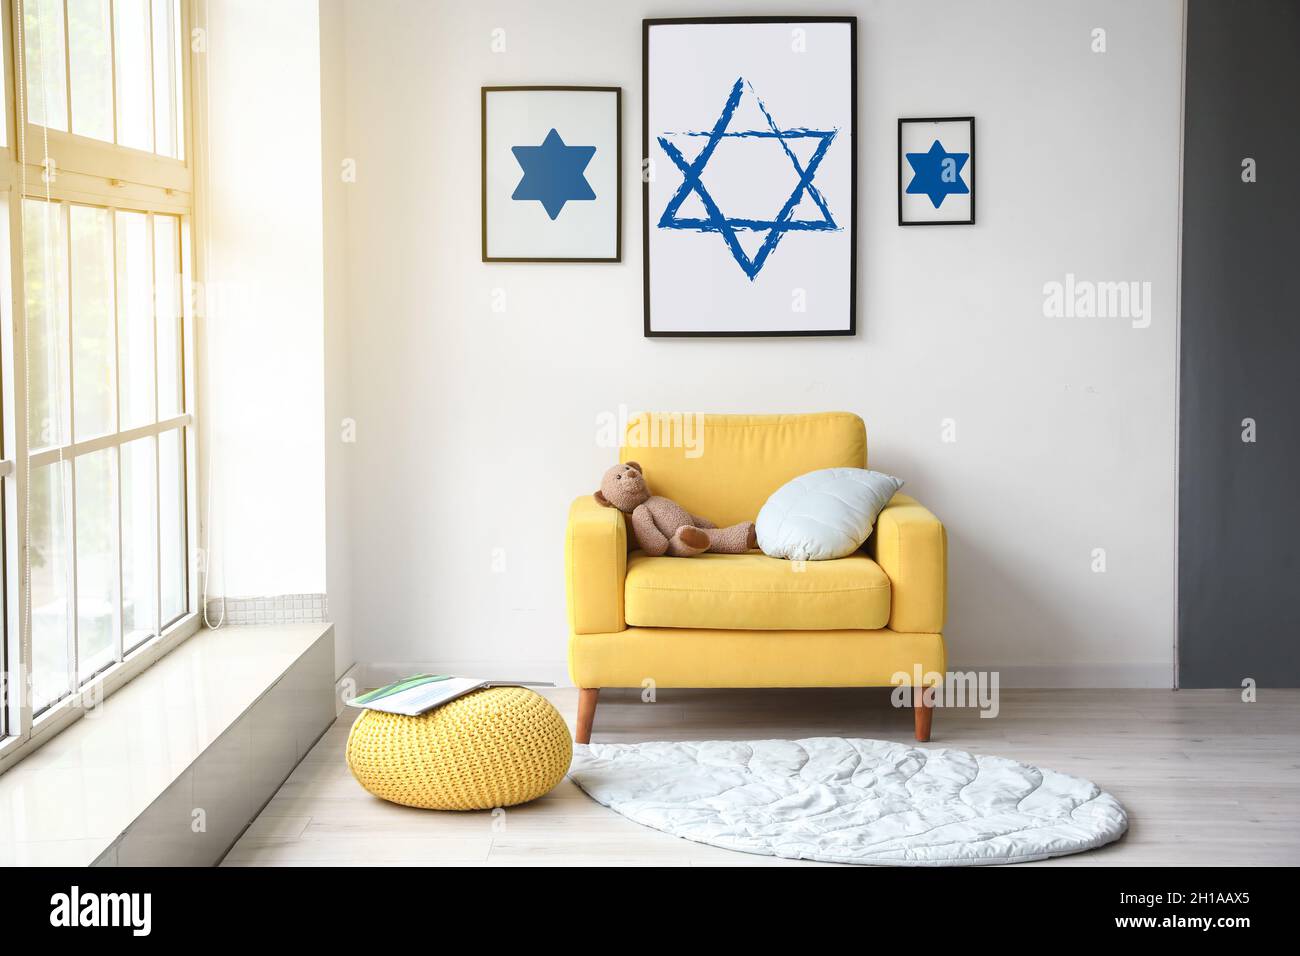 Paintings of David Stars hanging on light wall in interior of room Stock Photo